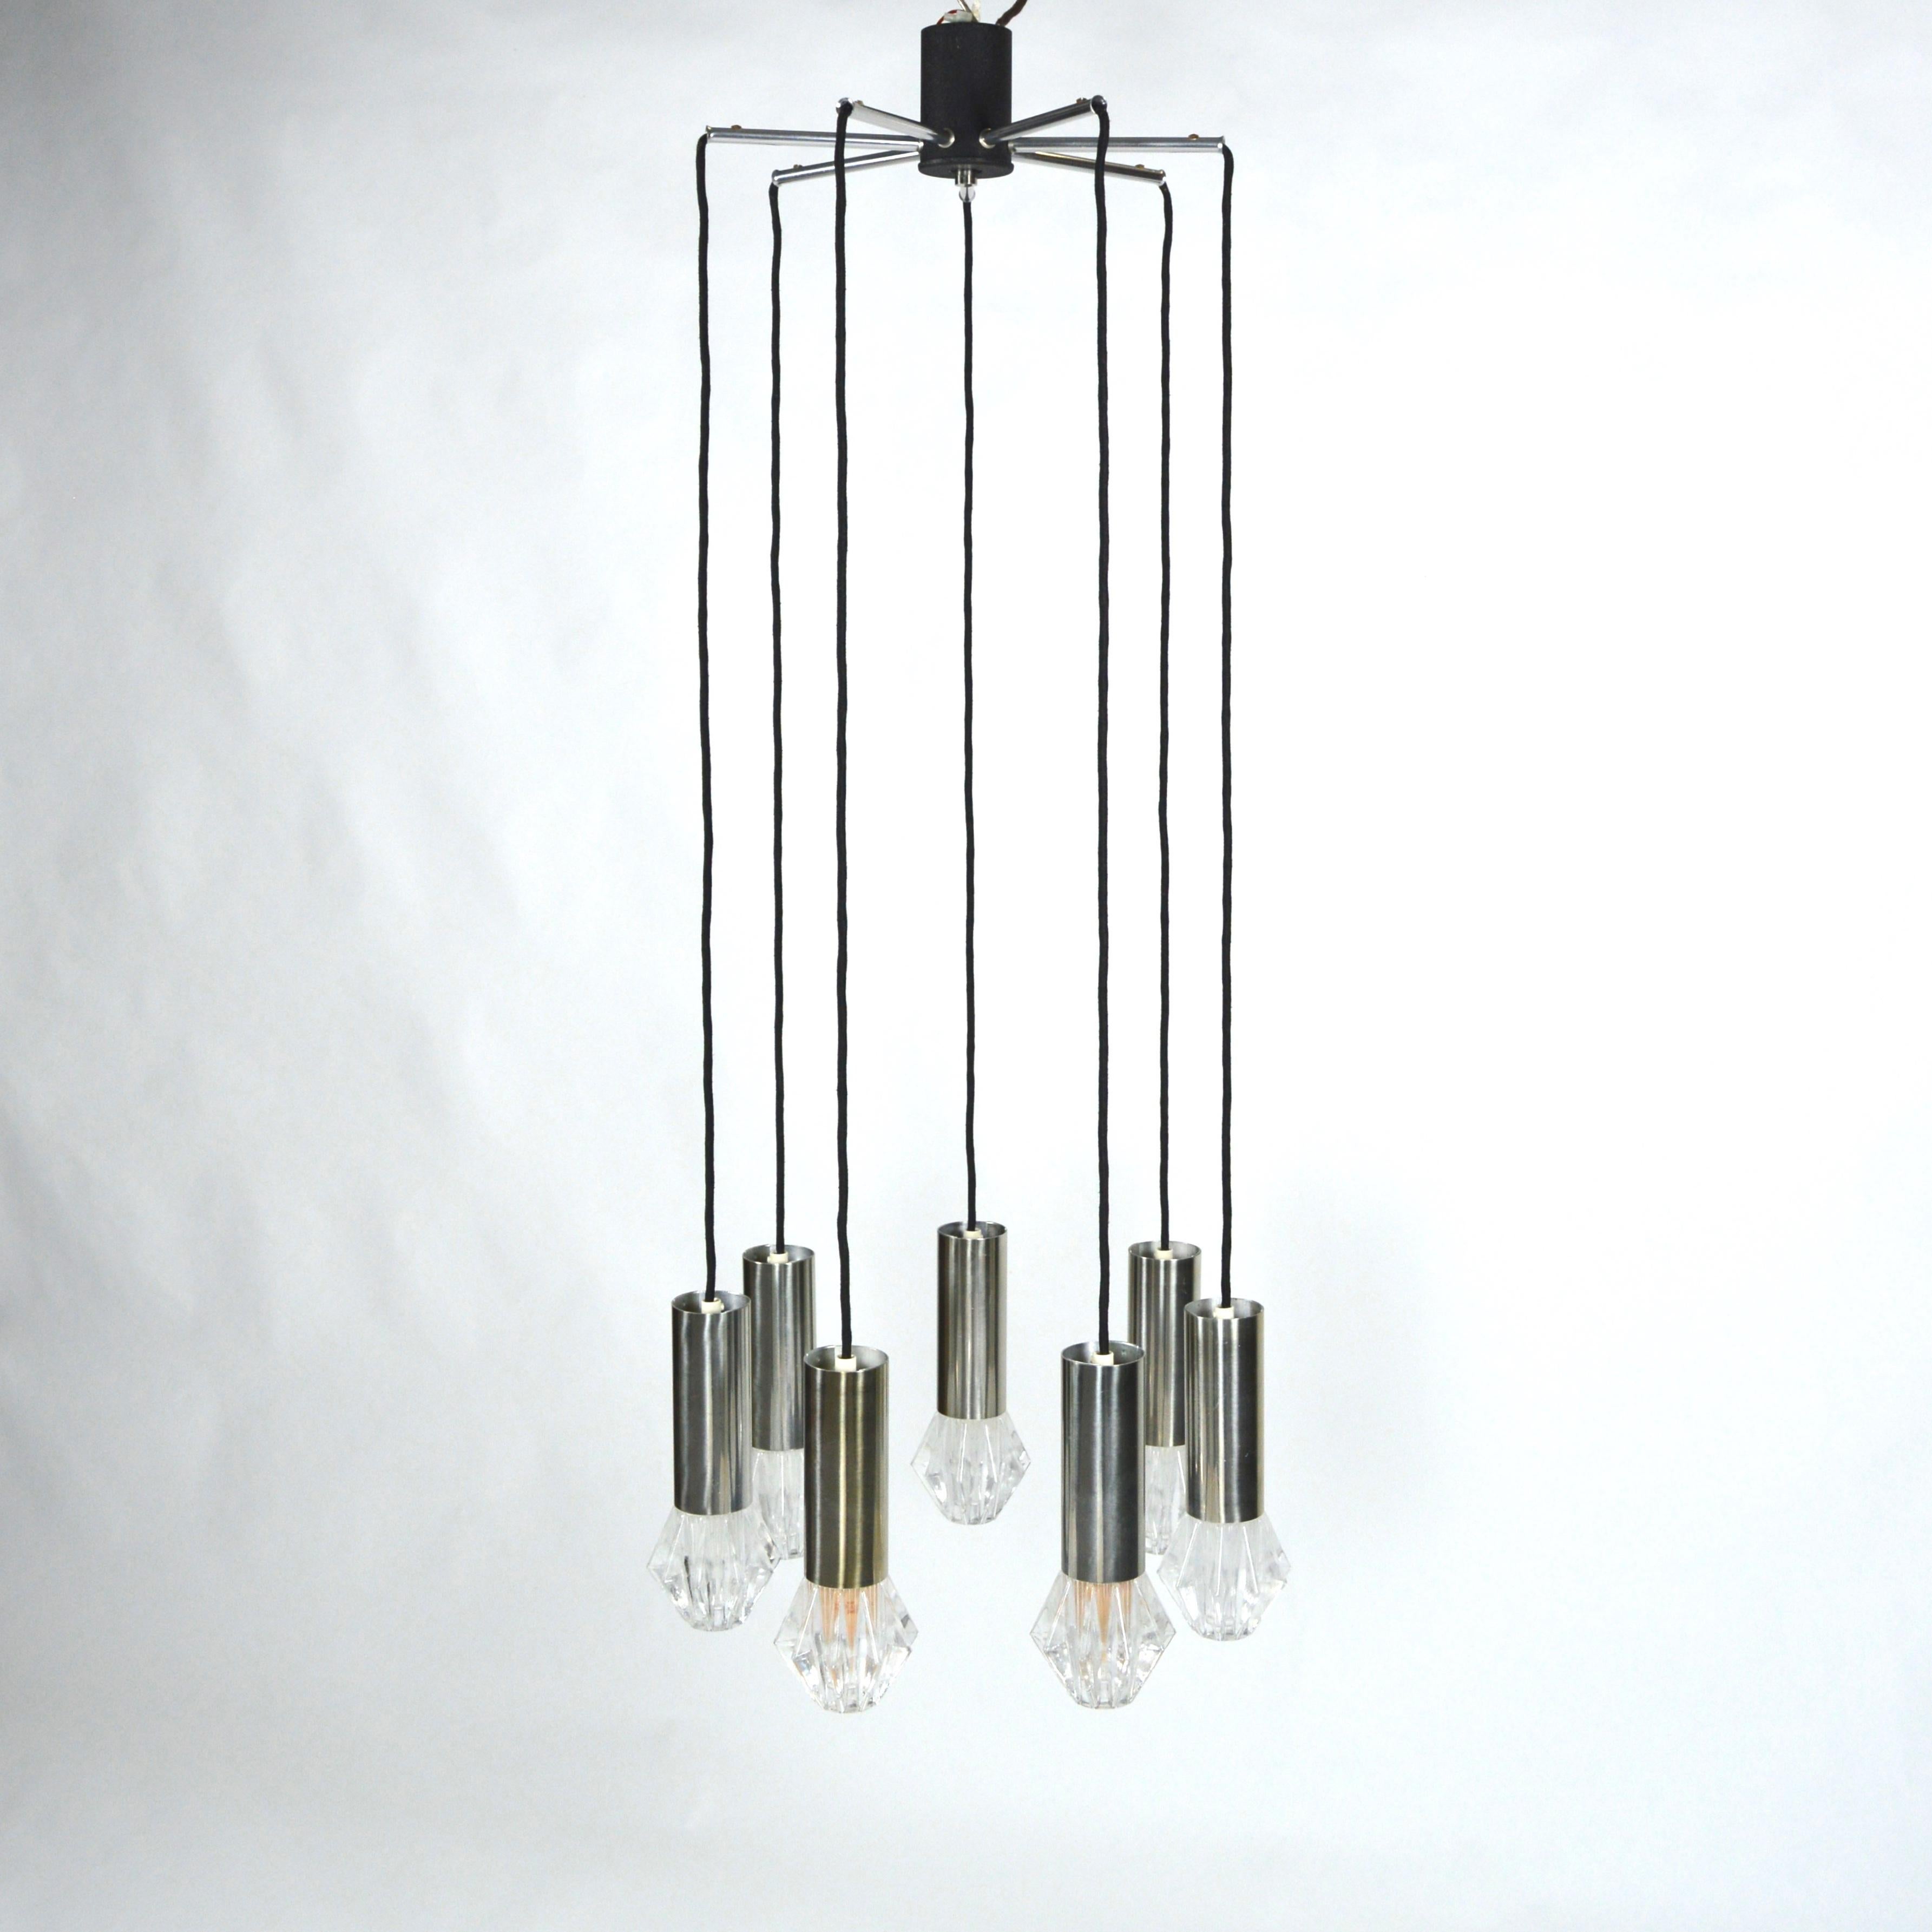 1970s Chrome and Glass Chandelier, Netherlands For Sale 2